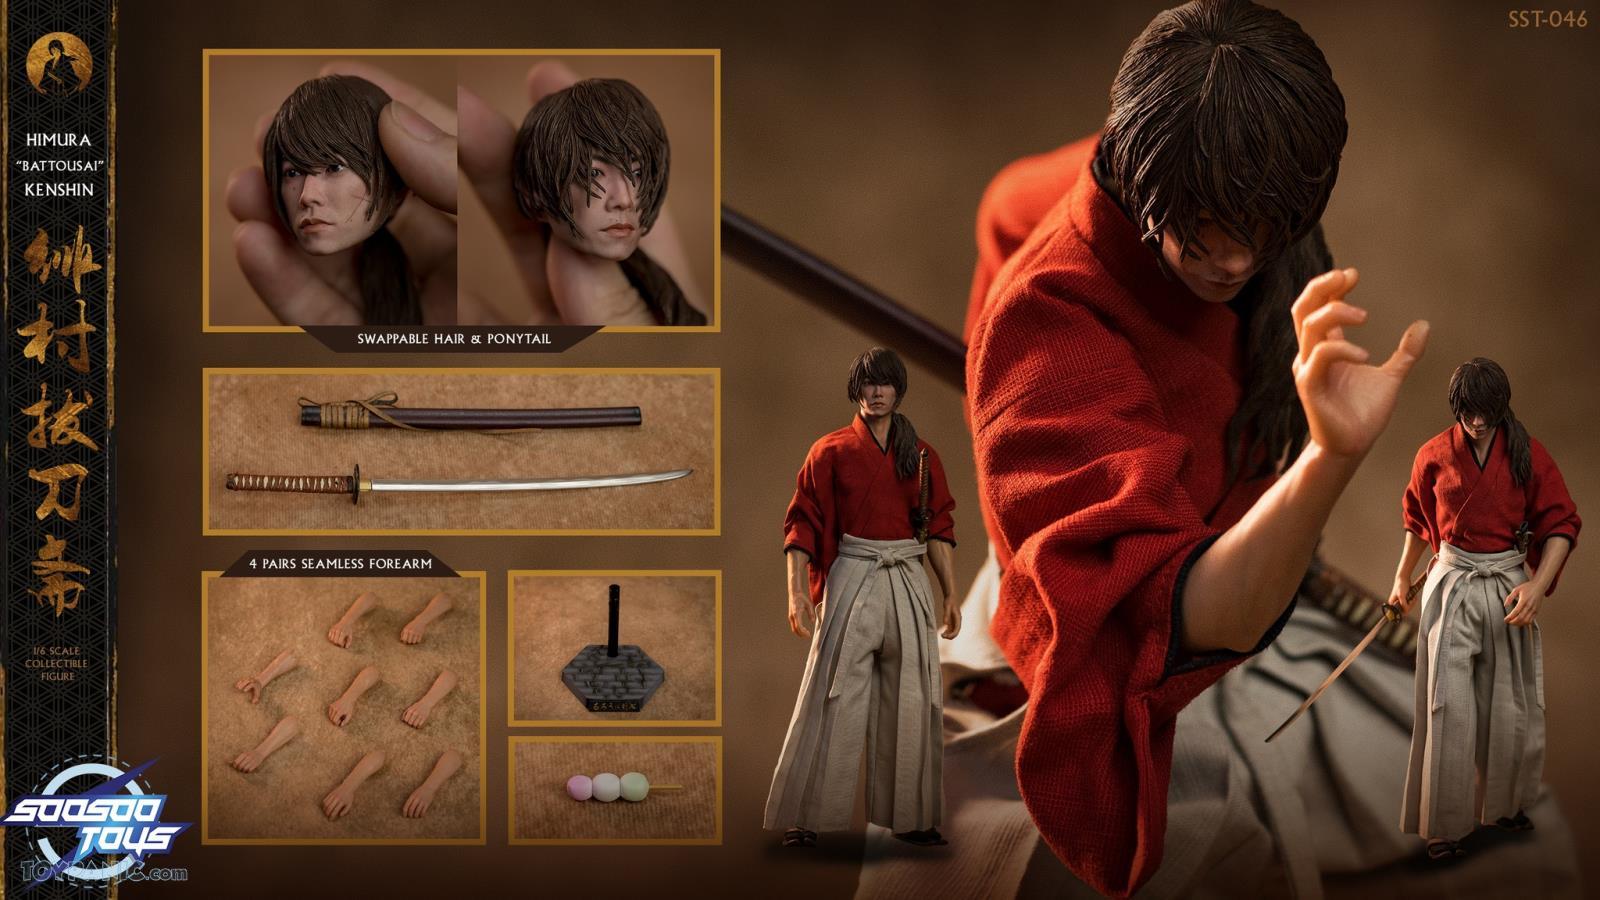 Japanese - NEW PRODUCT: 1/6 scale Rurouni Kenshin Collectible Figure from SooSooToys 712202251234PM_474230